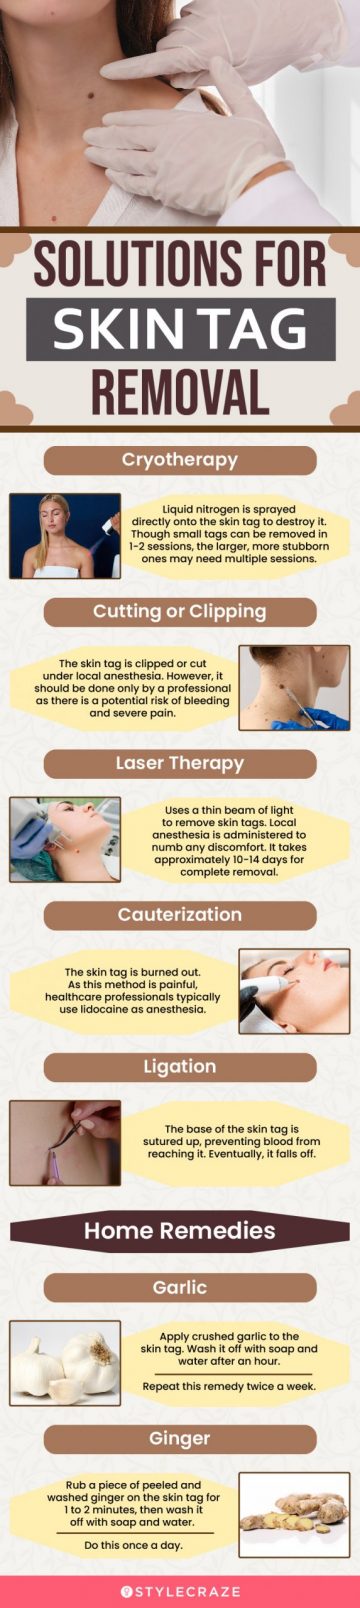 solutions for skin tag removal (infographic)